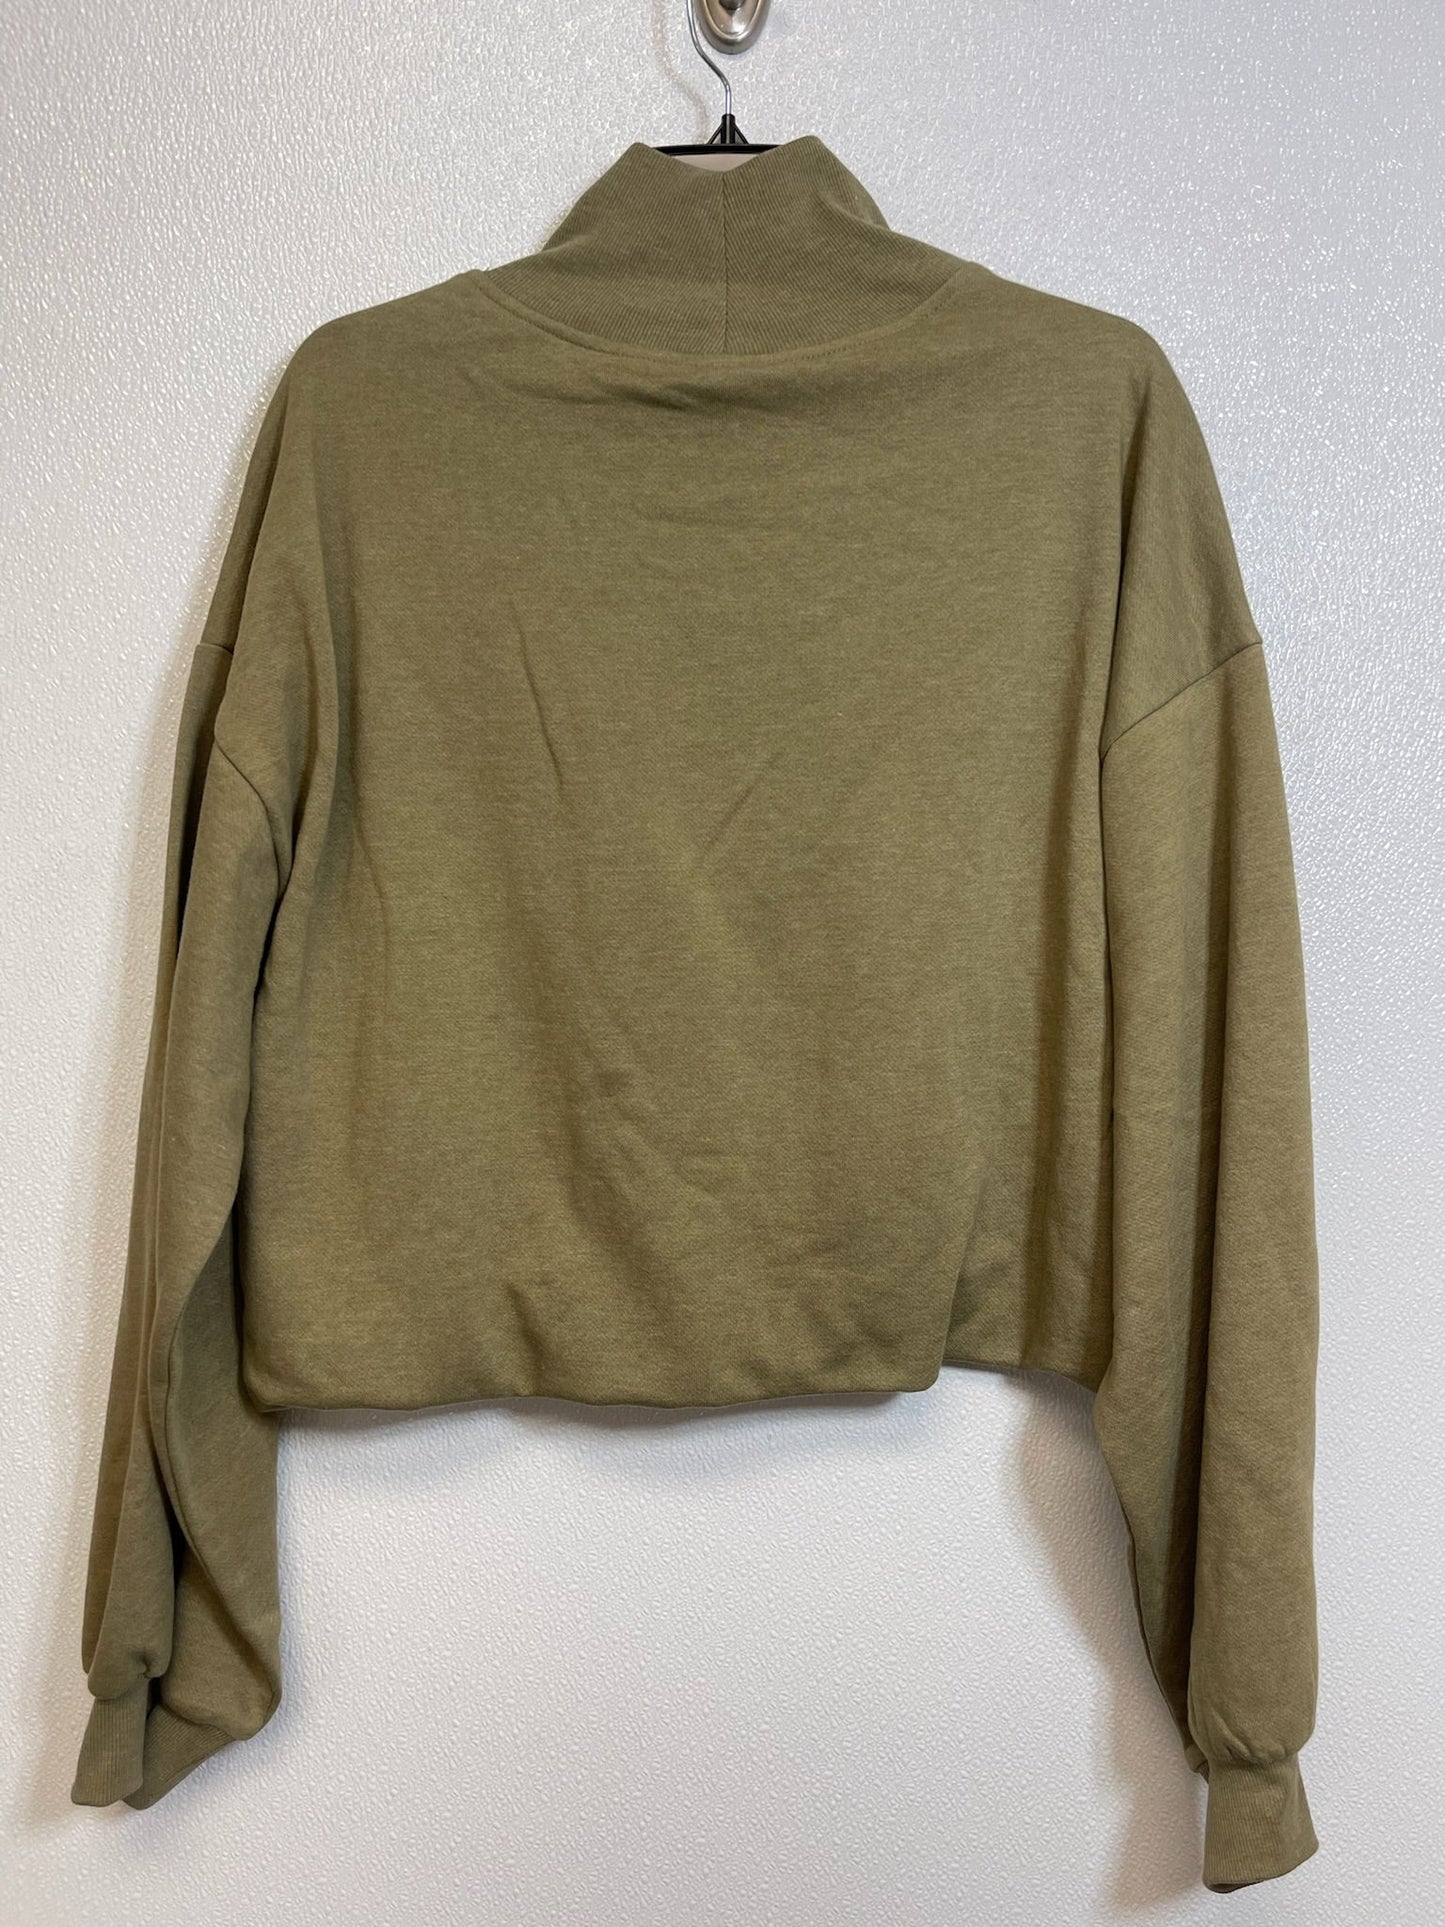 Olive Top Long Sleeve Pilcro, Size Xl